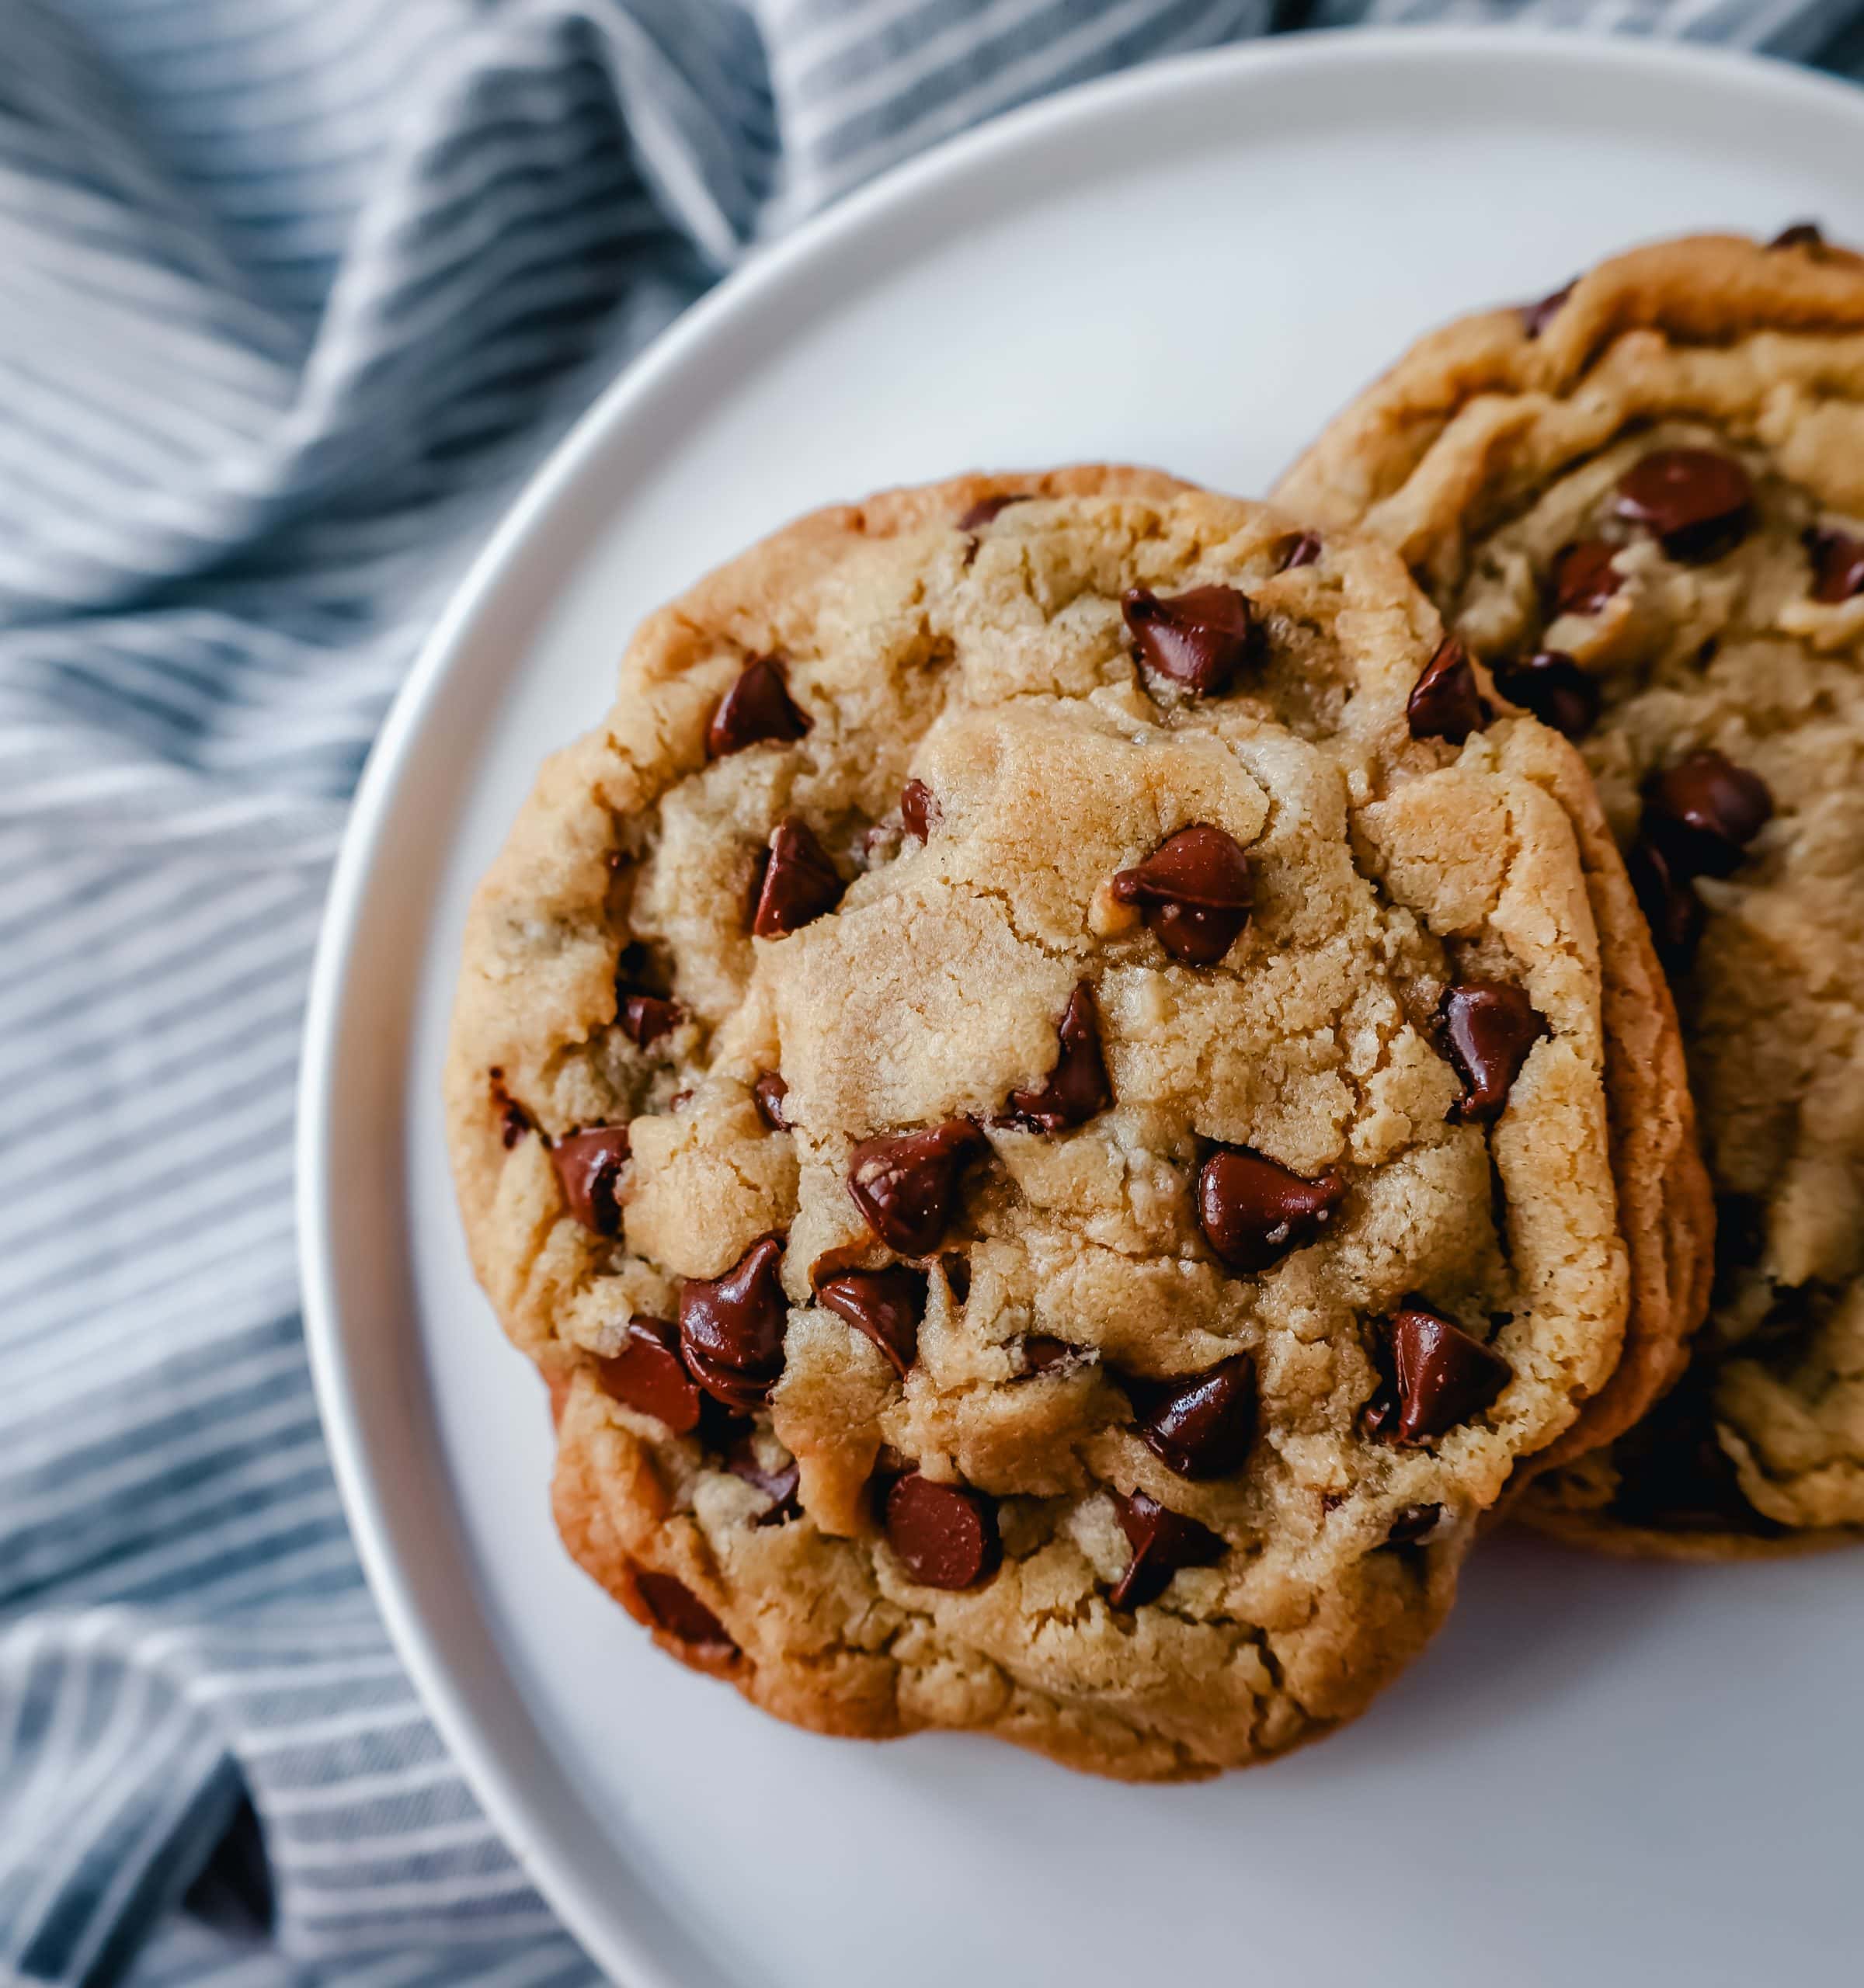 Chocolate Chip Cookie Recipe for Two. A quick and easy 15-minute start to finish chocolate chip cookie recipe for two people. This small-batch cookie recipe yields 2 to 3 cookies so perfect when you are craving cookies but don't want to make a big batch.